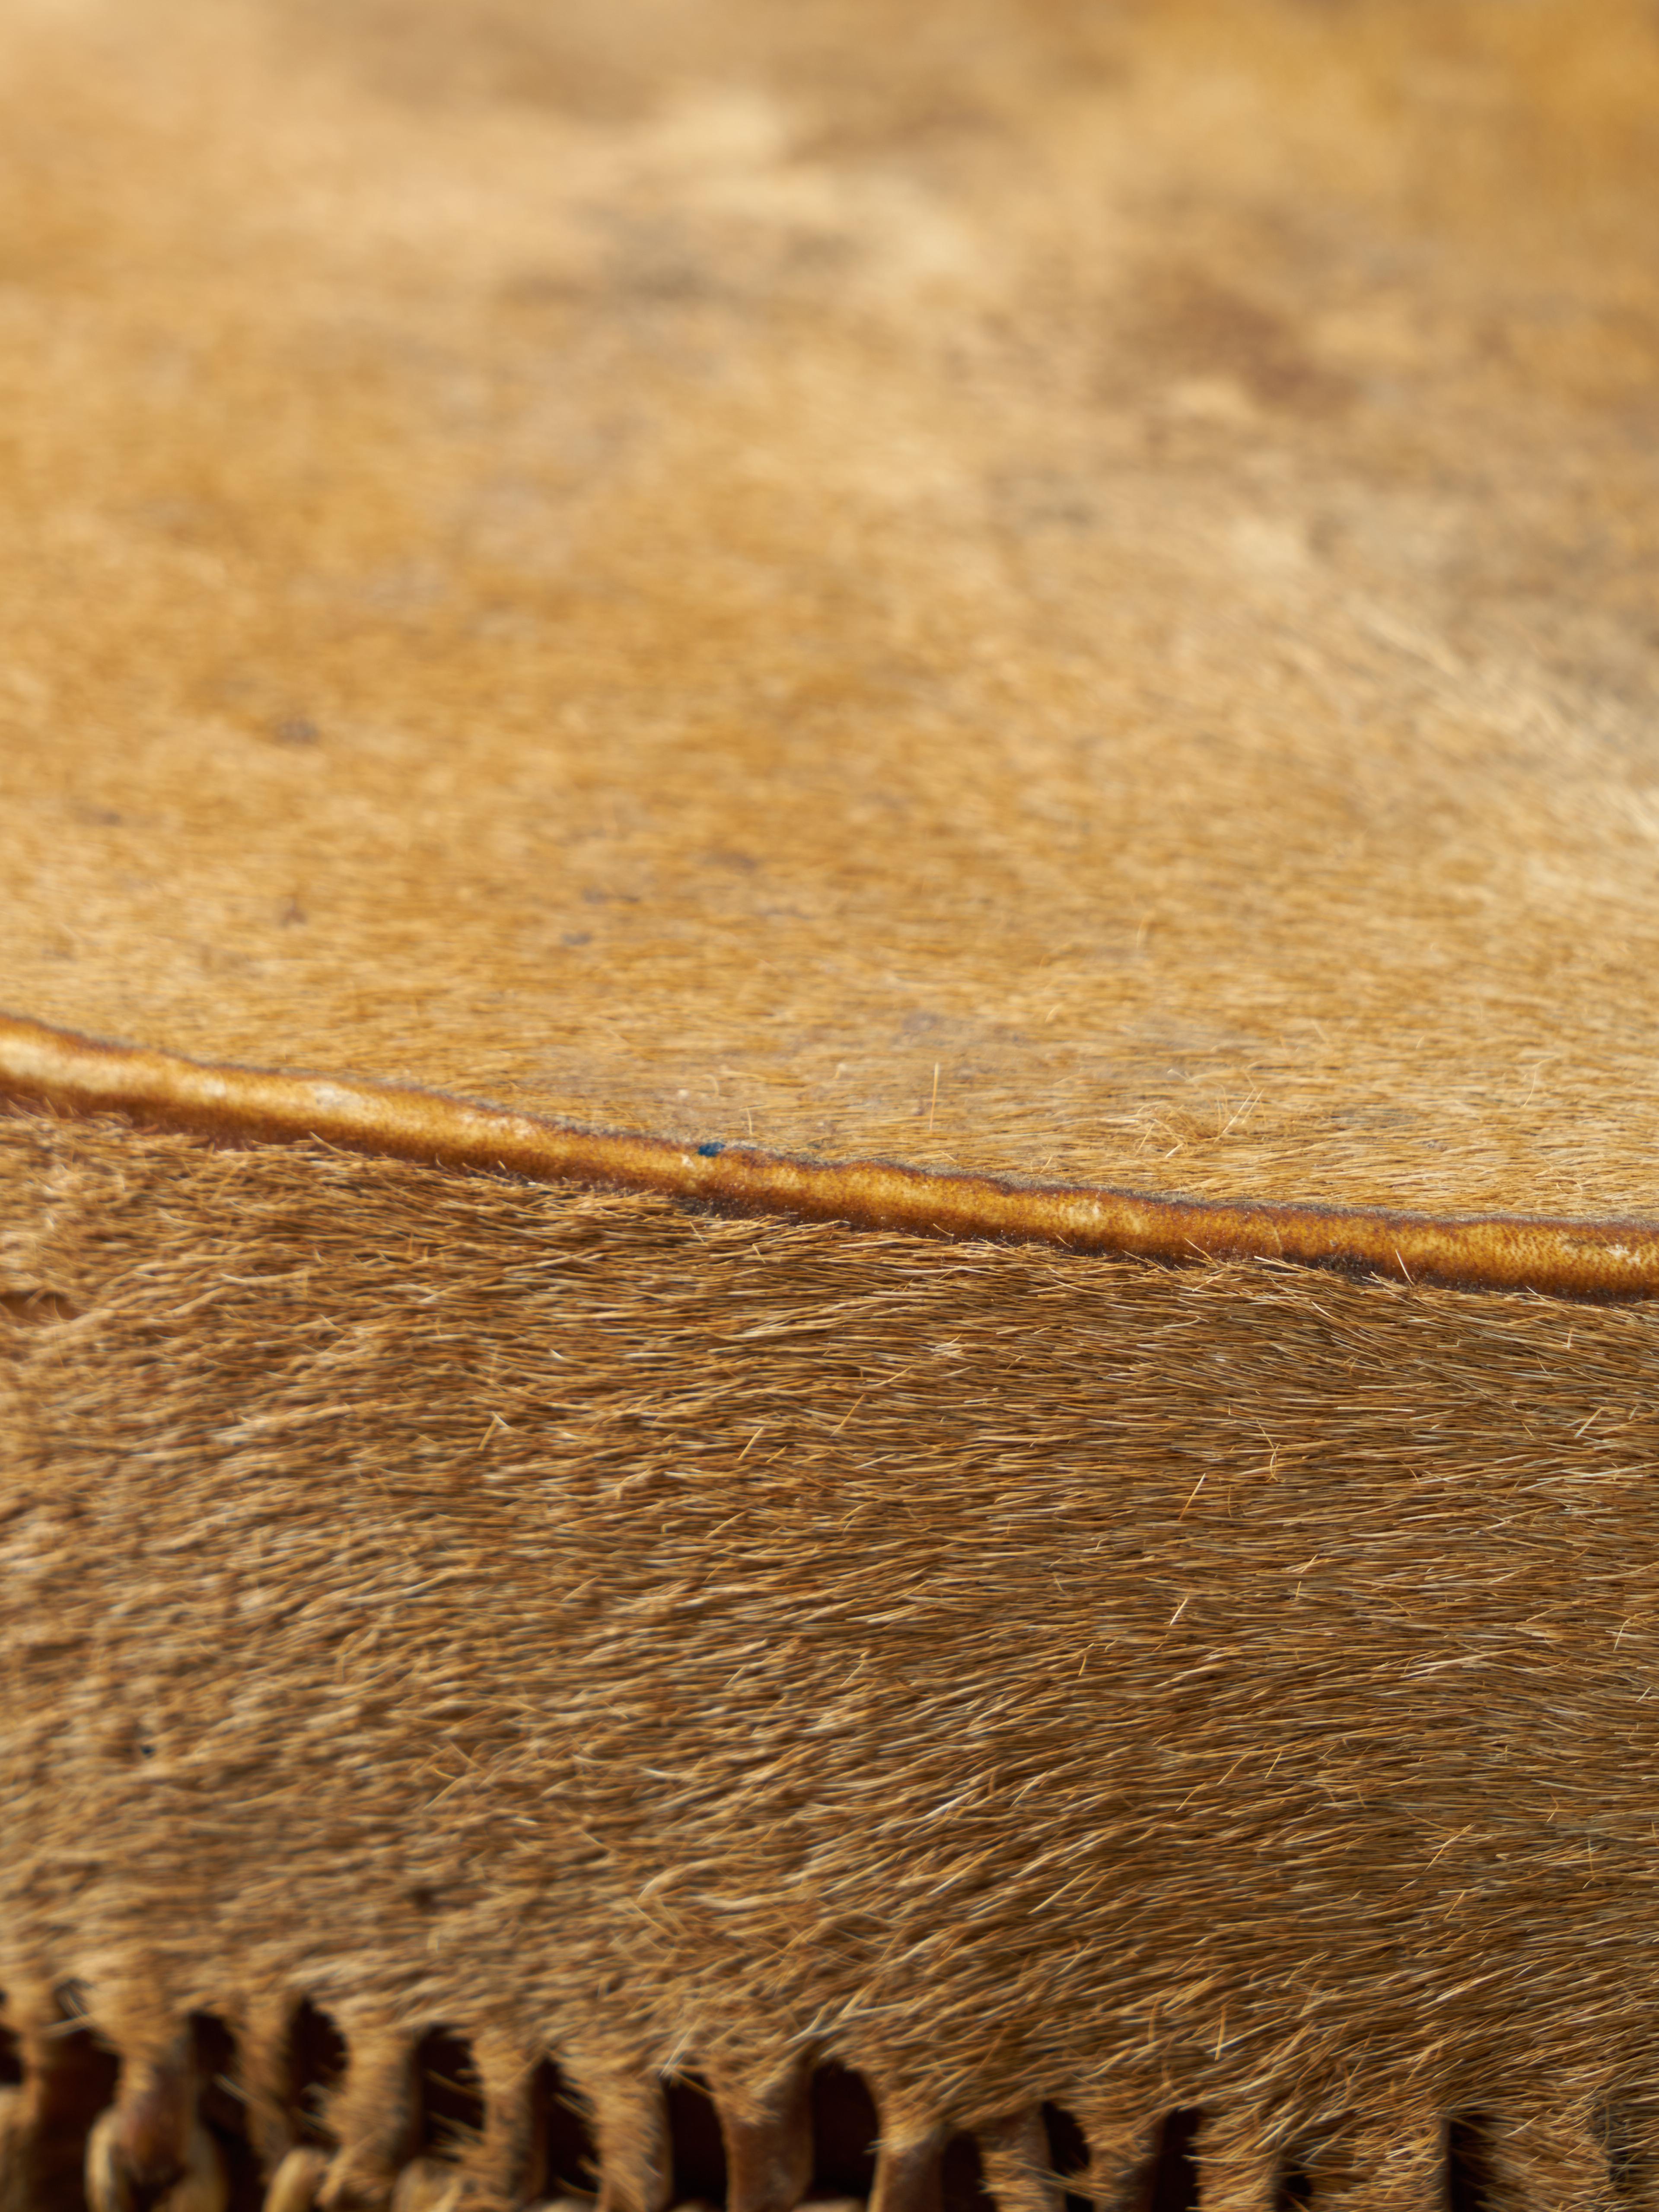 Wooden Drum with Shell and Membrane in Animal Skin 1